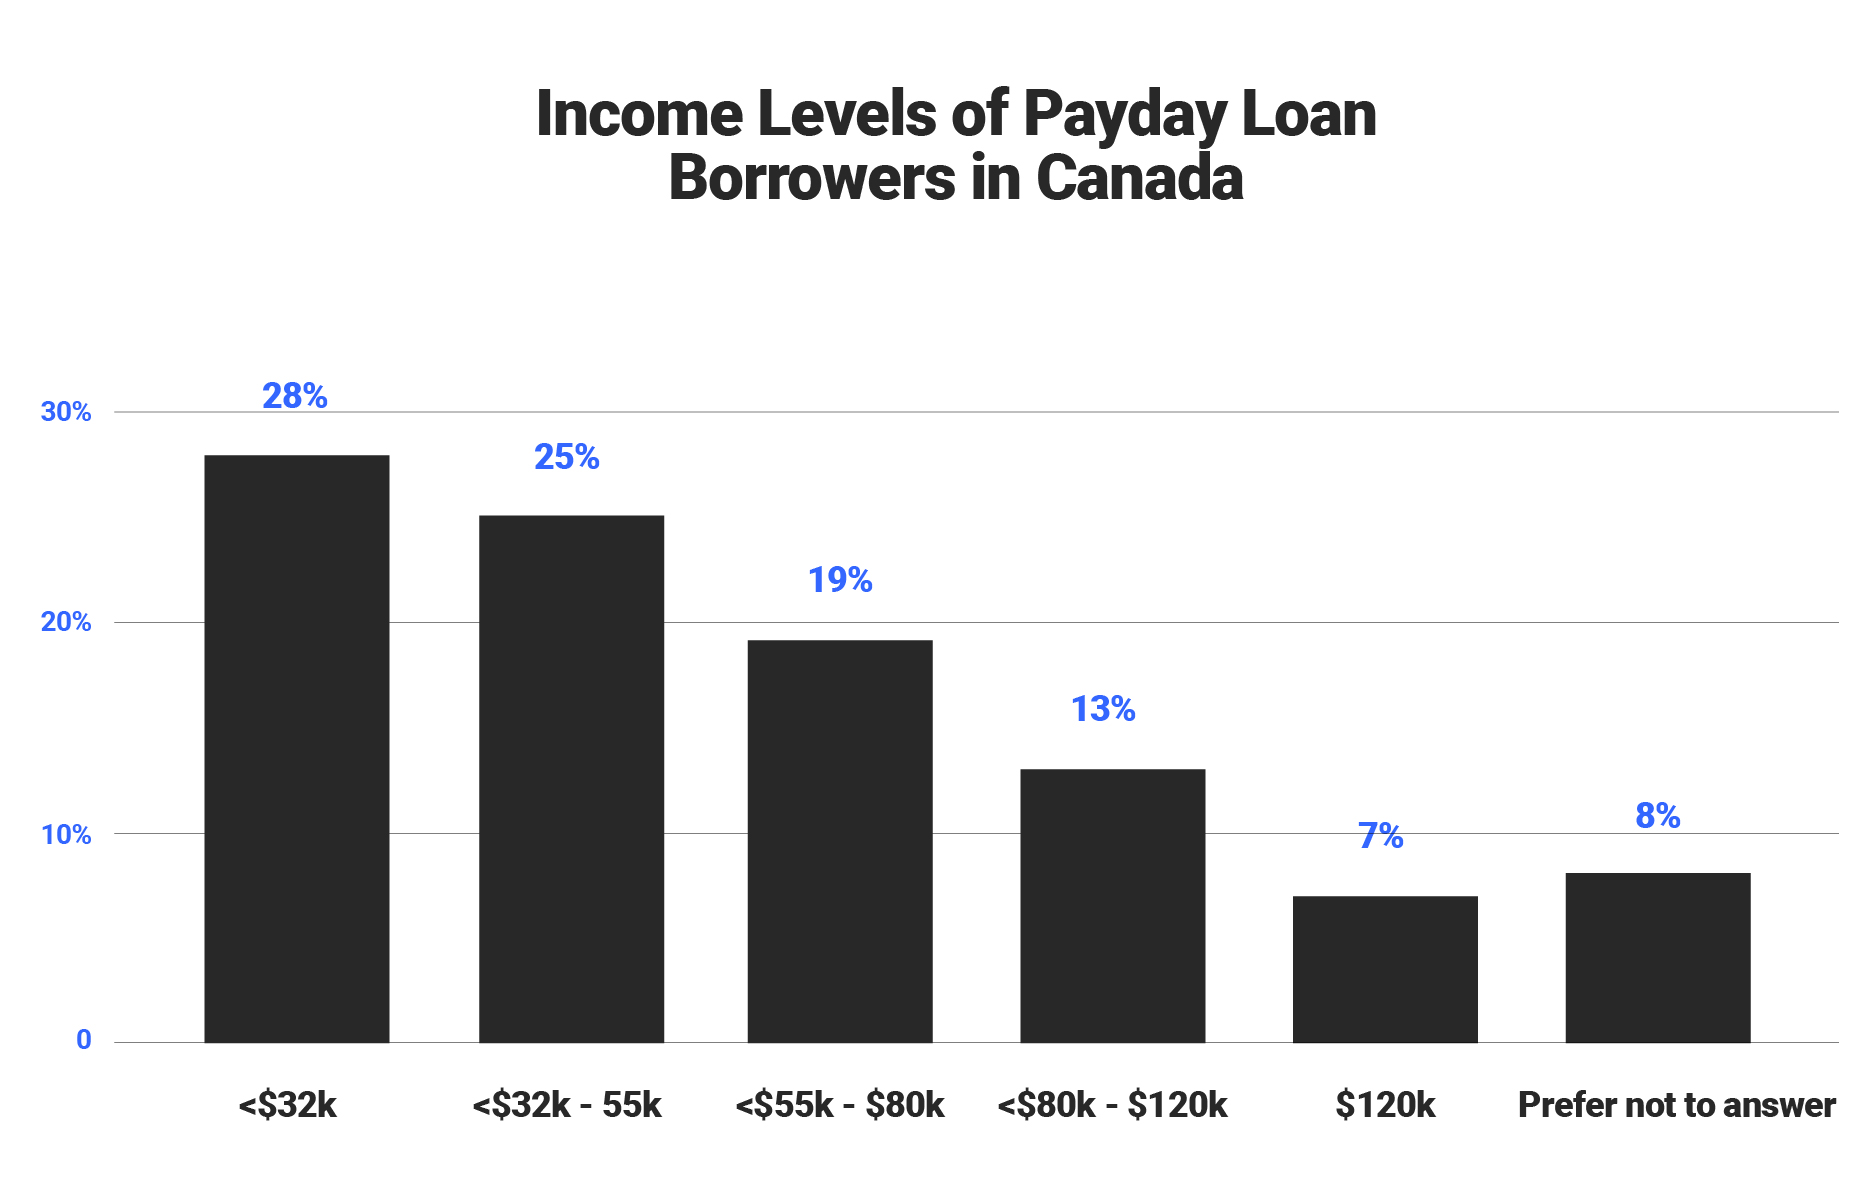 Income Levels of Payday Loan Borrowers in Canada